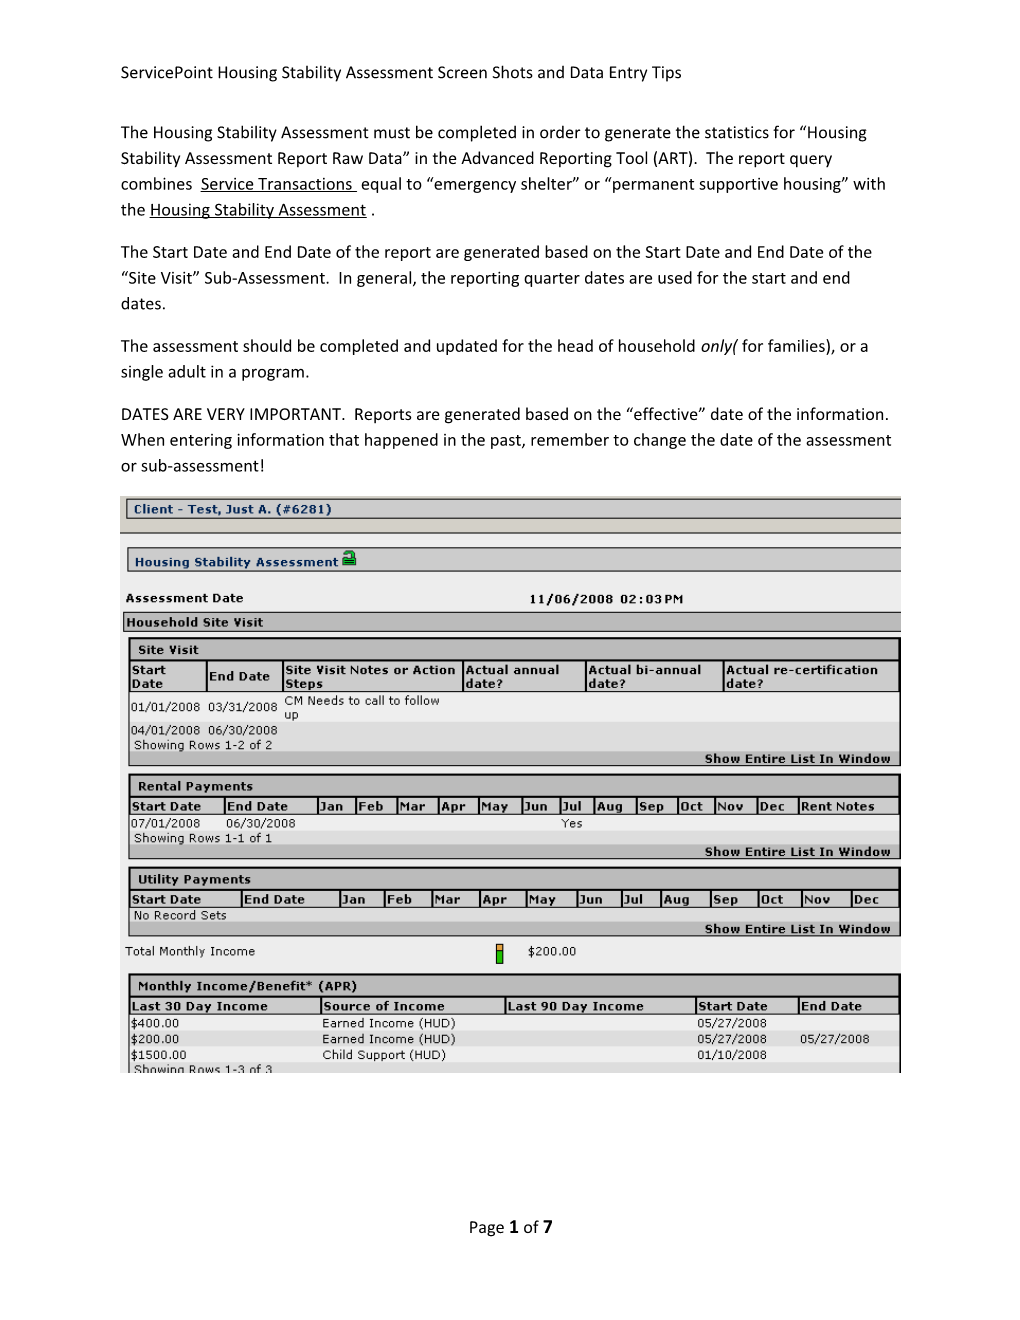 Servicepoint Housing Stability Assessment Screen Shots and Data Entry Tips